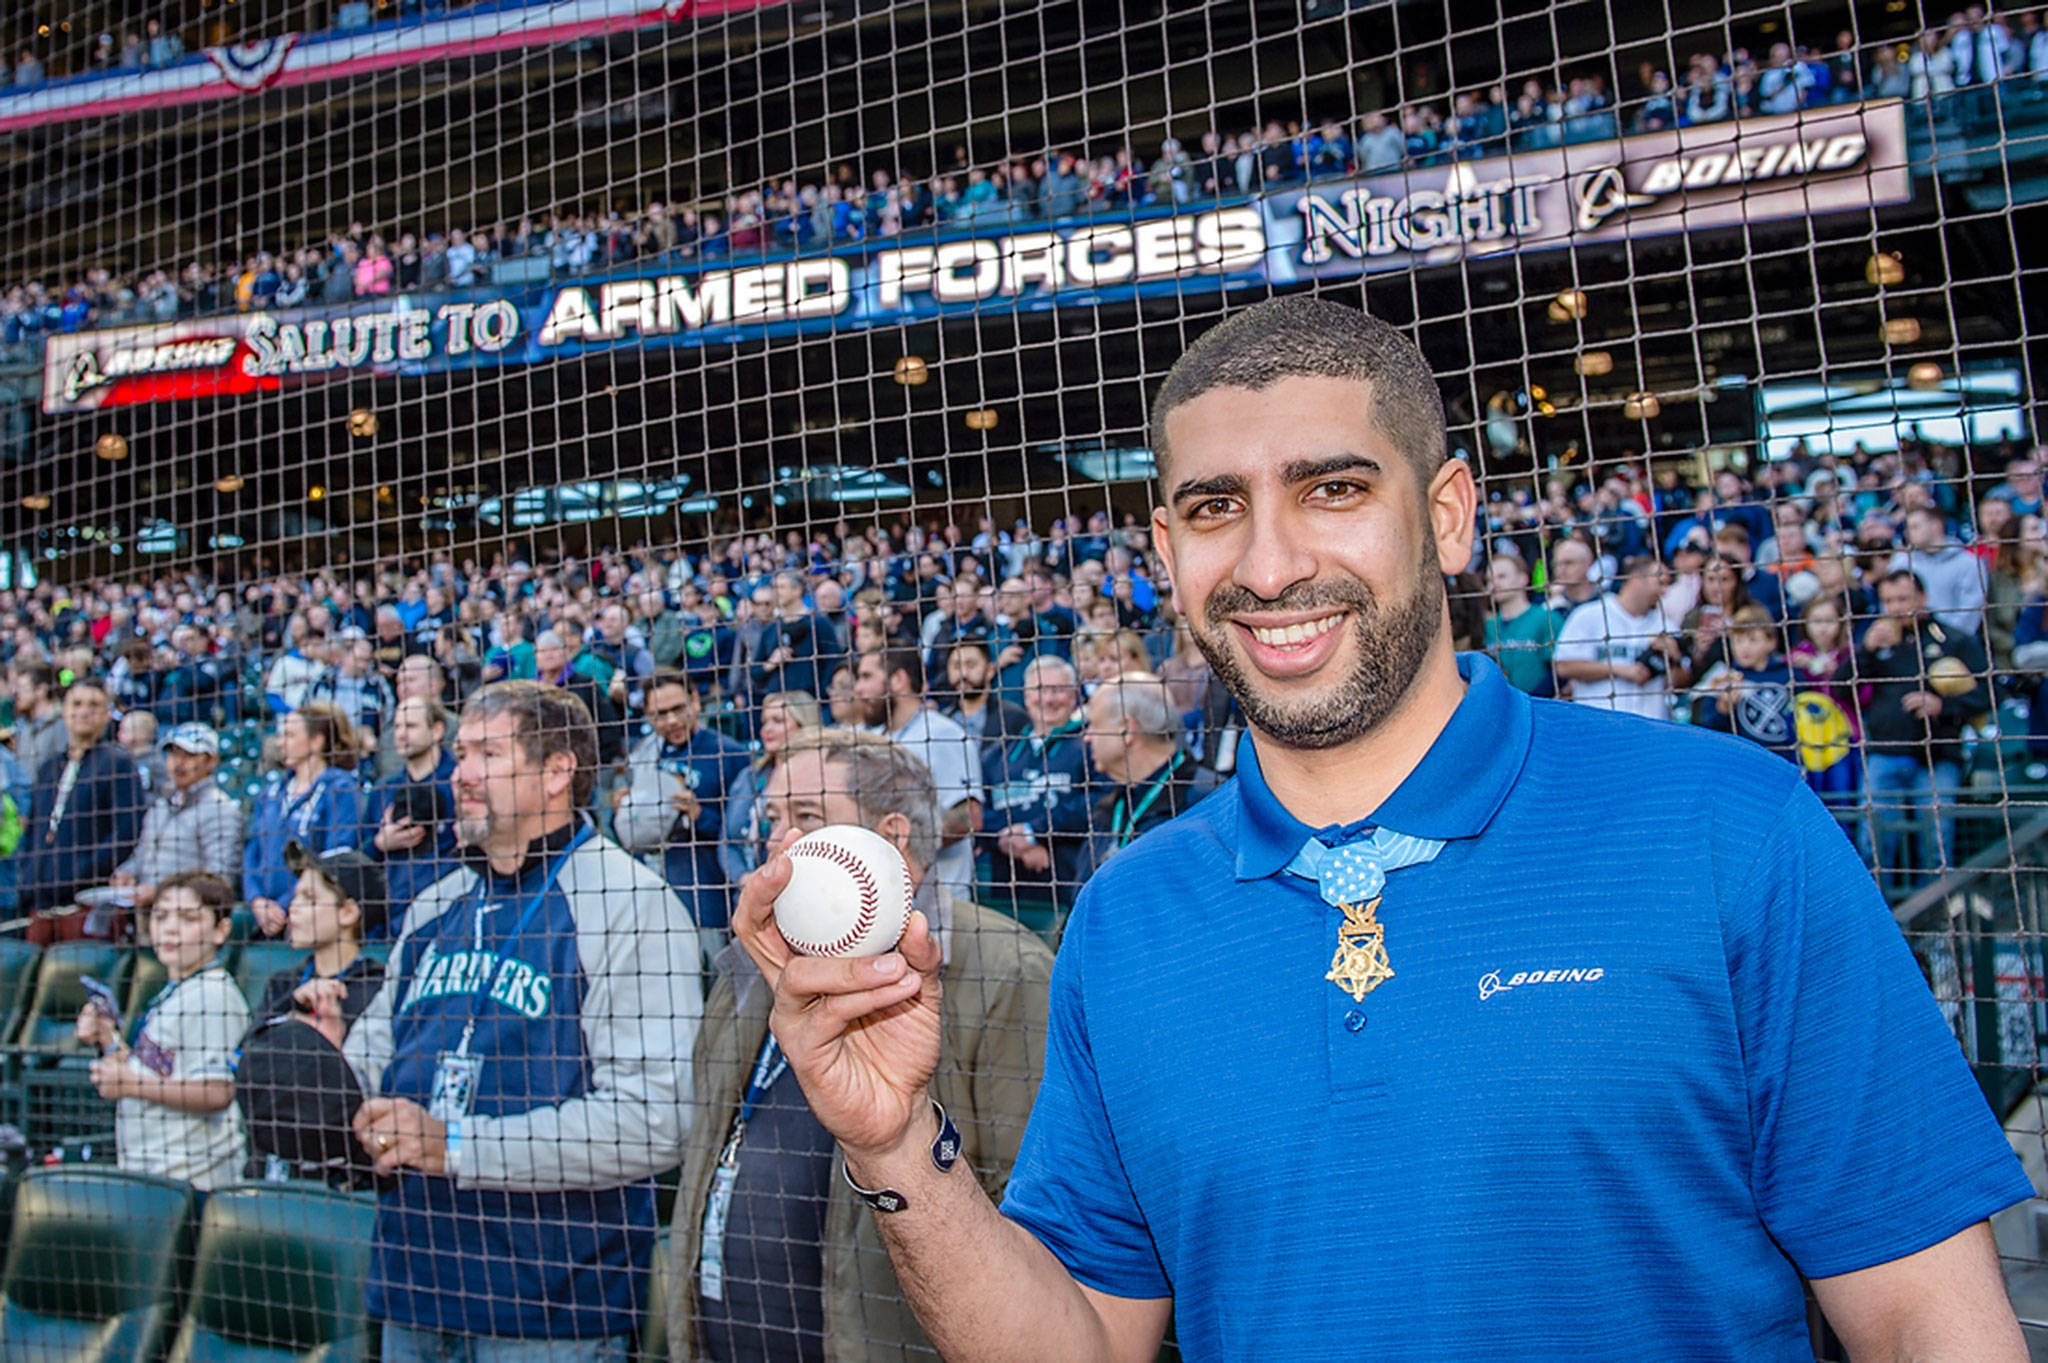 Flo Groberg, Boeing’s director of veterans outreach and Medal of Honor recipient, prepares to throw out the ceremonial first pitch at the Mariners Salute to Armed Forces game, sponsored by Boeing.